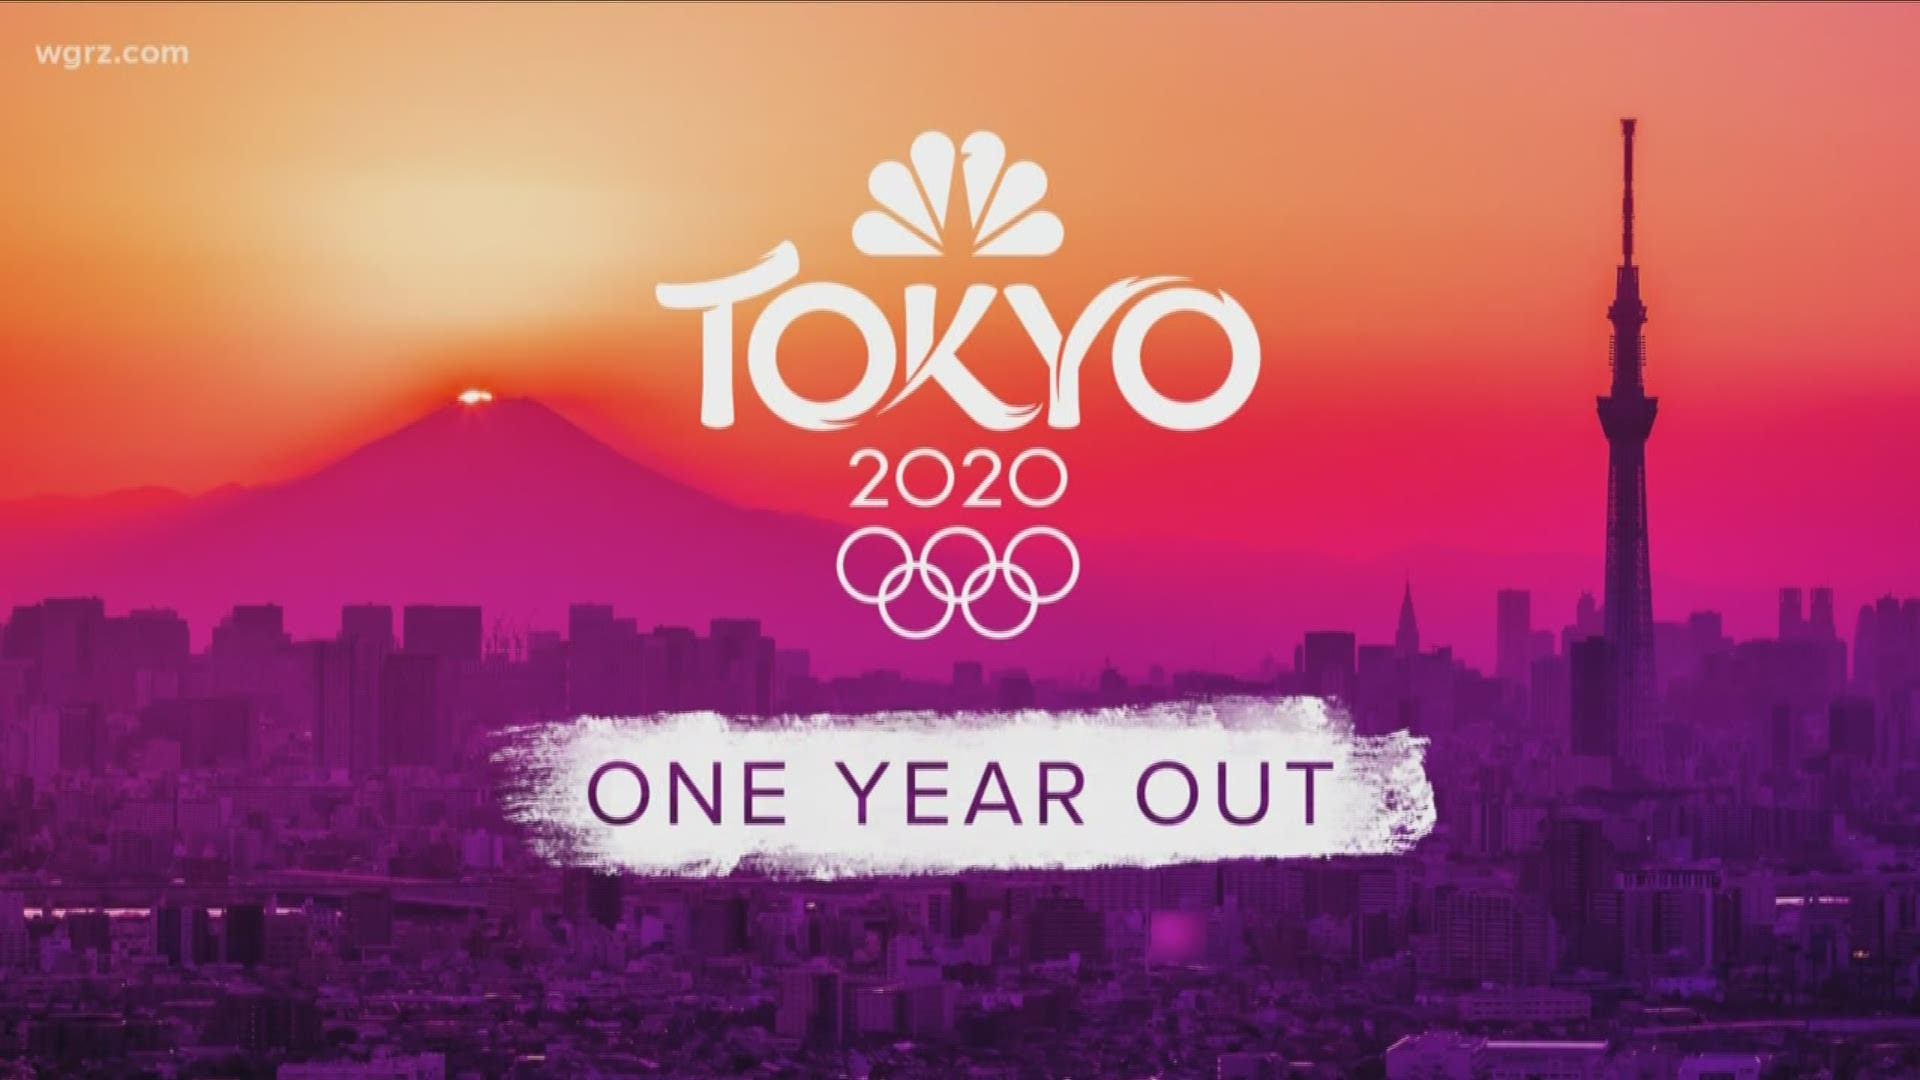 One year until 2020 summer Olympics in Tokyo